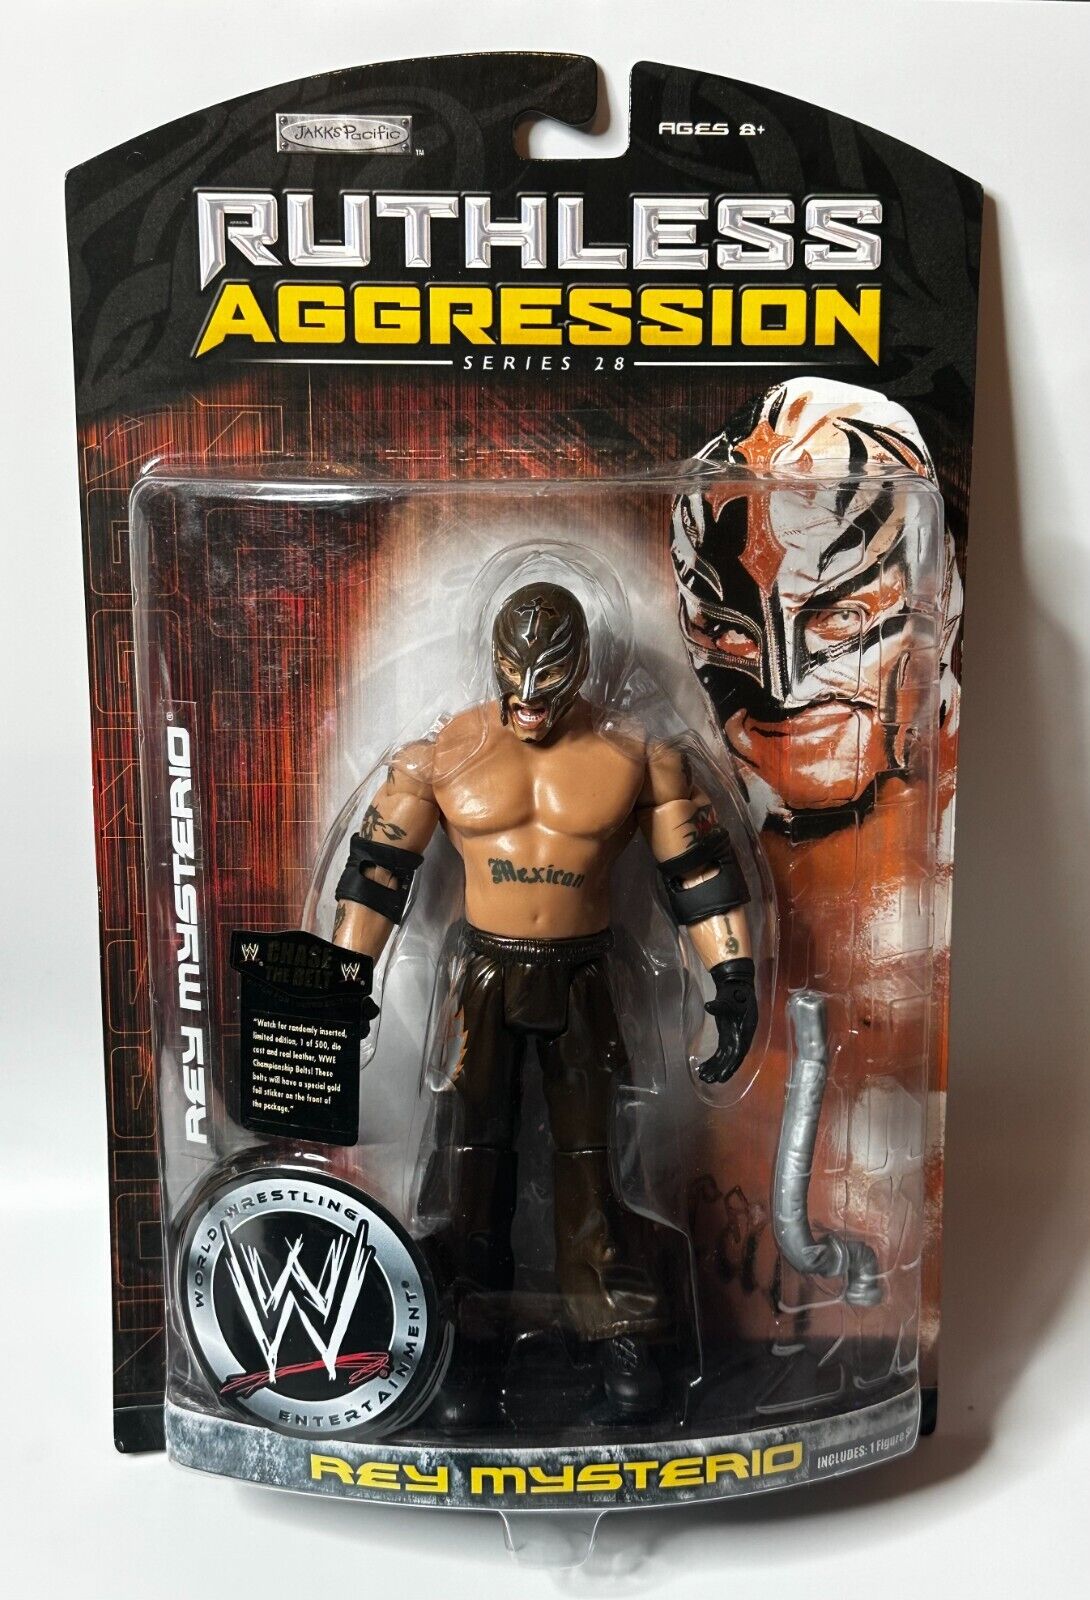 2007 WWE Jakks Pacific Ruthless Aggression Series 28 Rey Mysterio